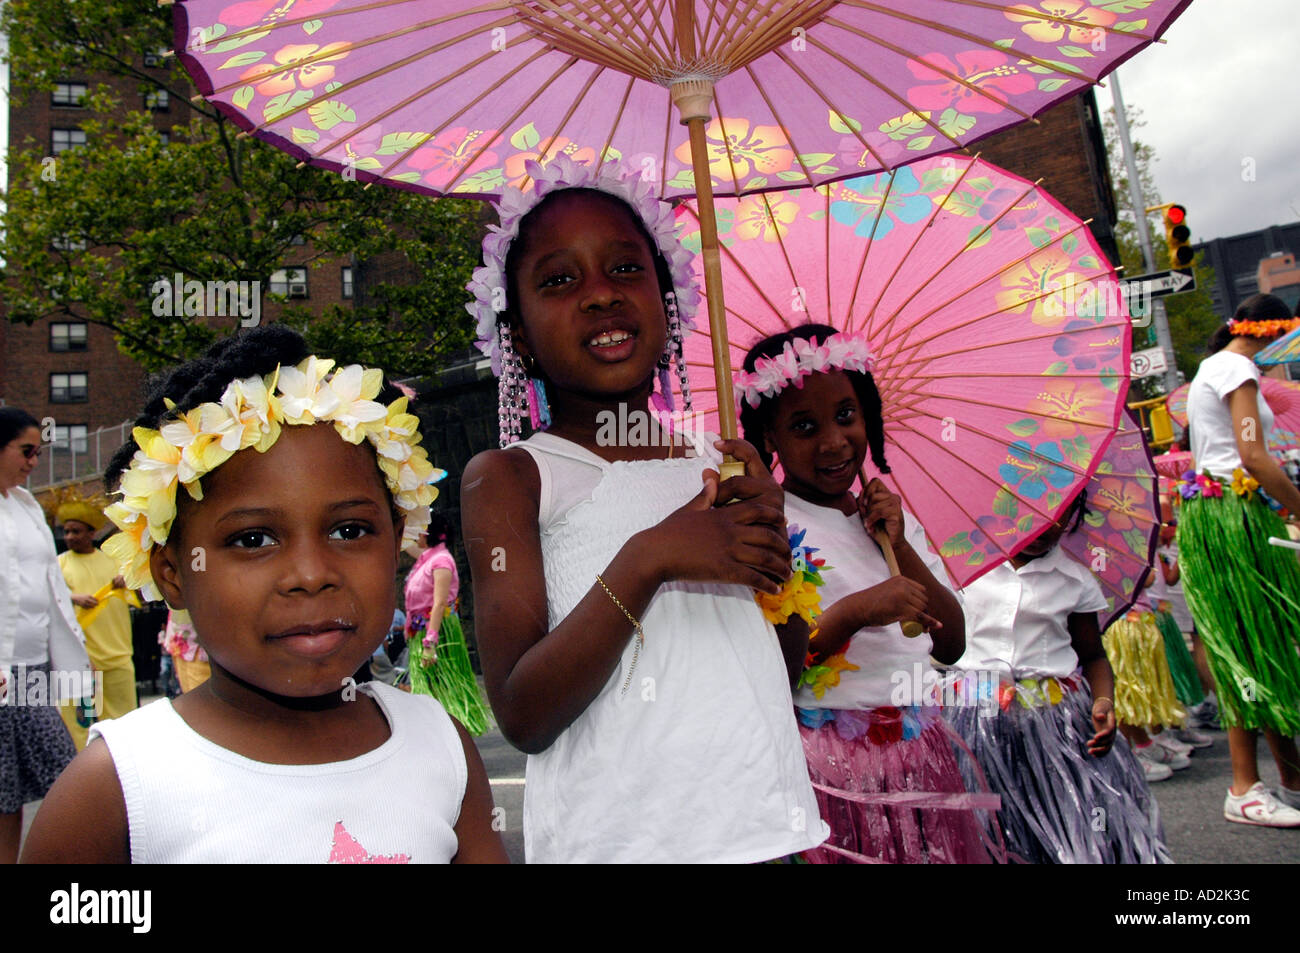 Members of Pentecostal churches throughout New York participate in the Children s Evangelical Parade The various church groups march through Spanish Harlem in the yearly parade spreading the word to believers and non believers alike Stock Photo